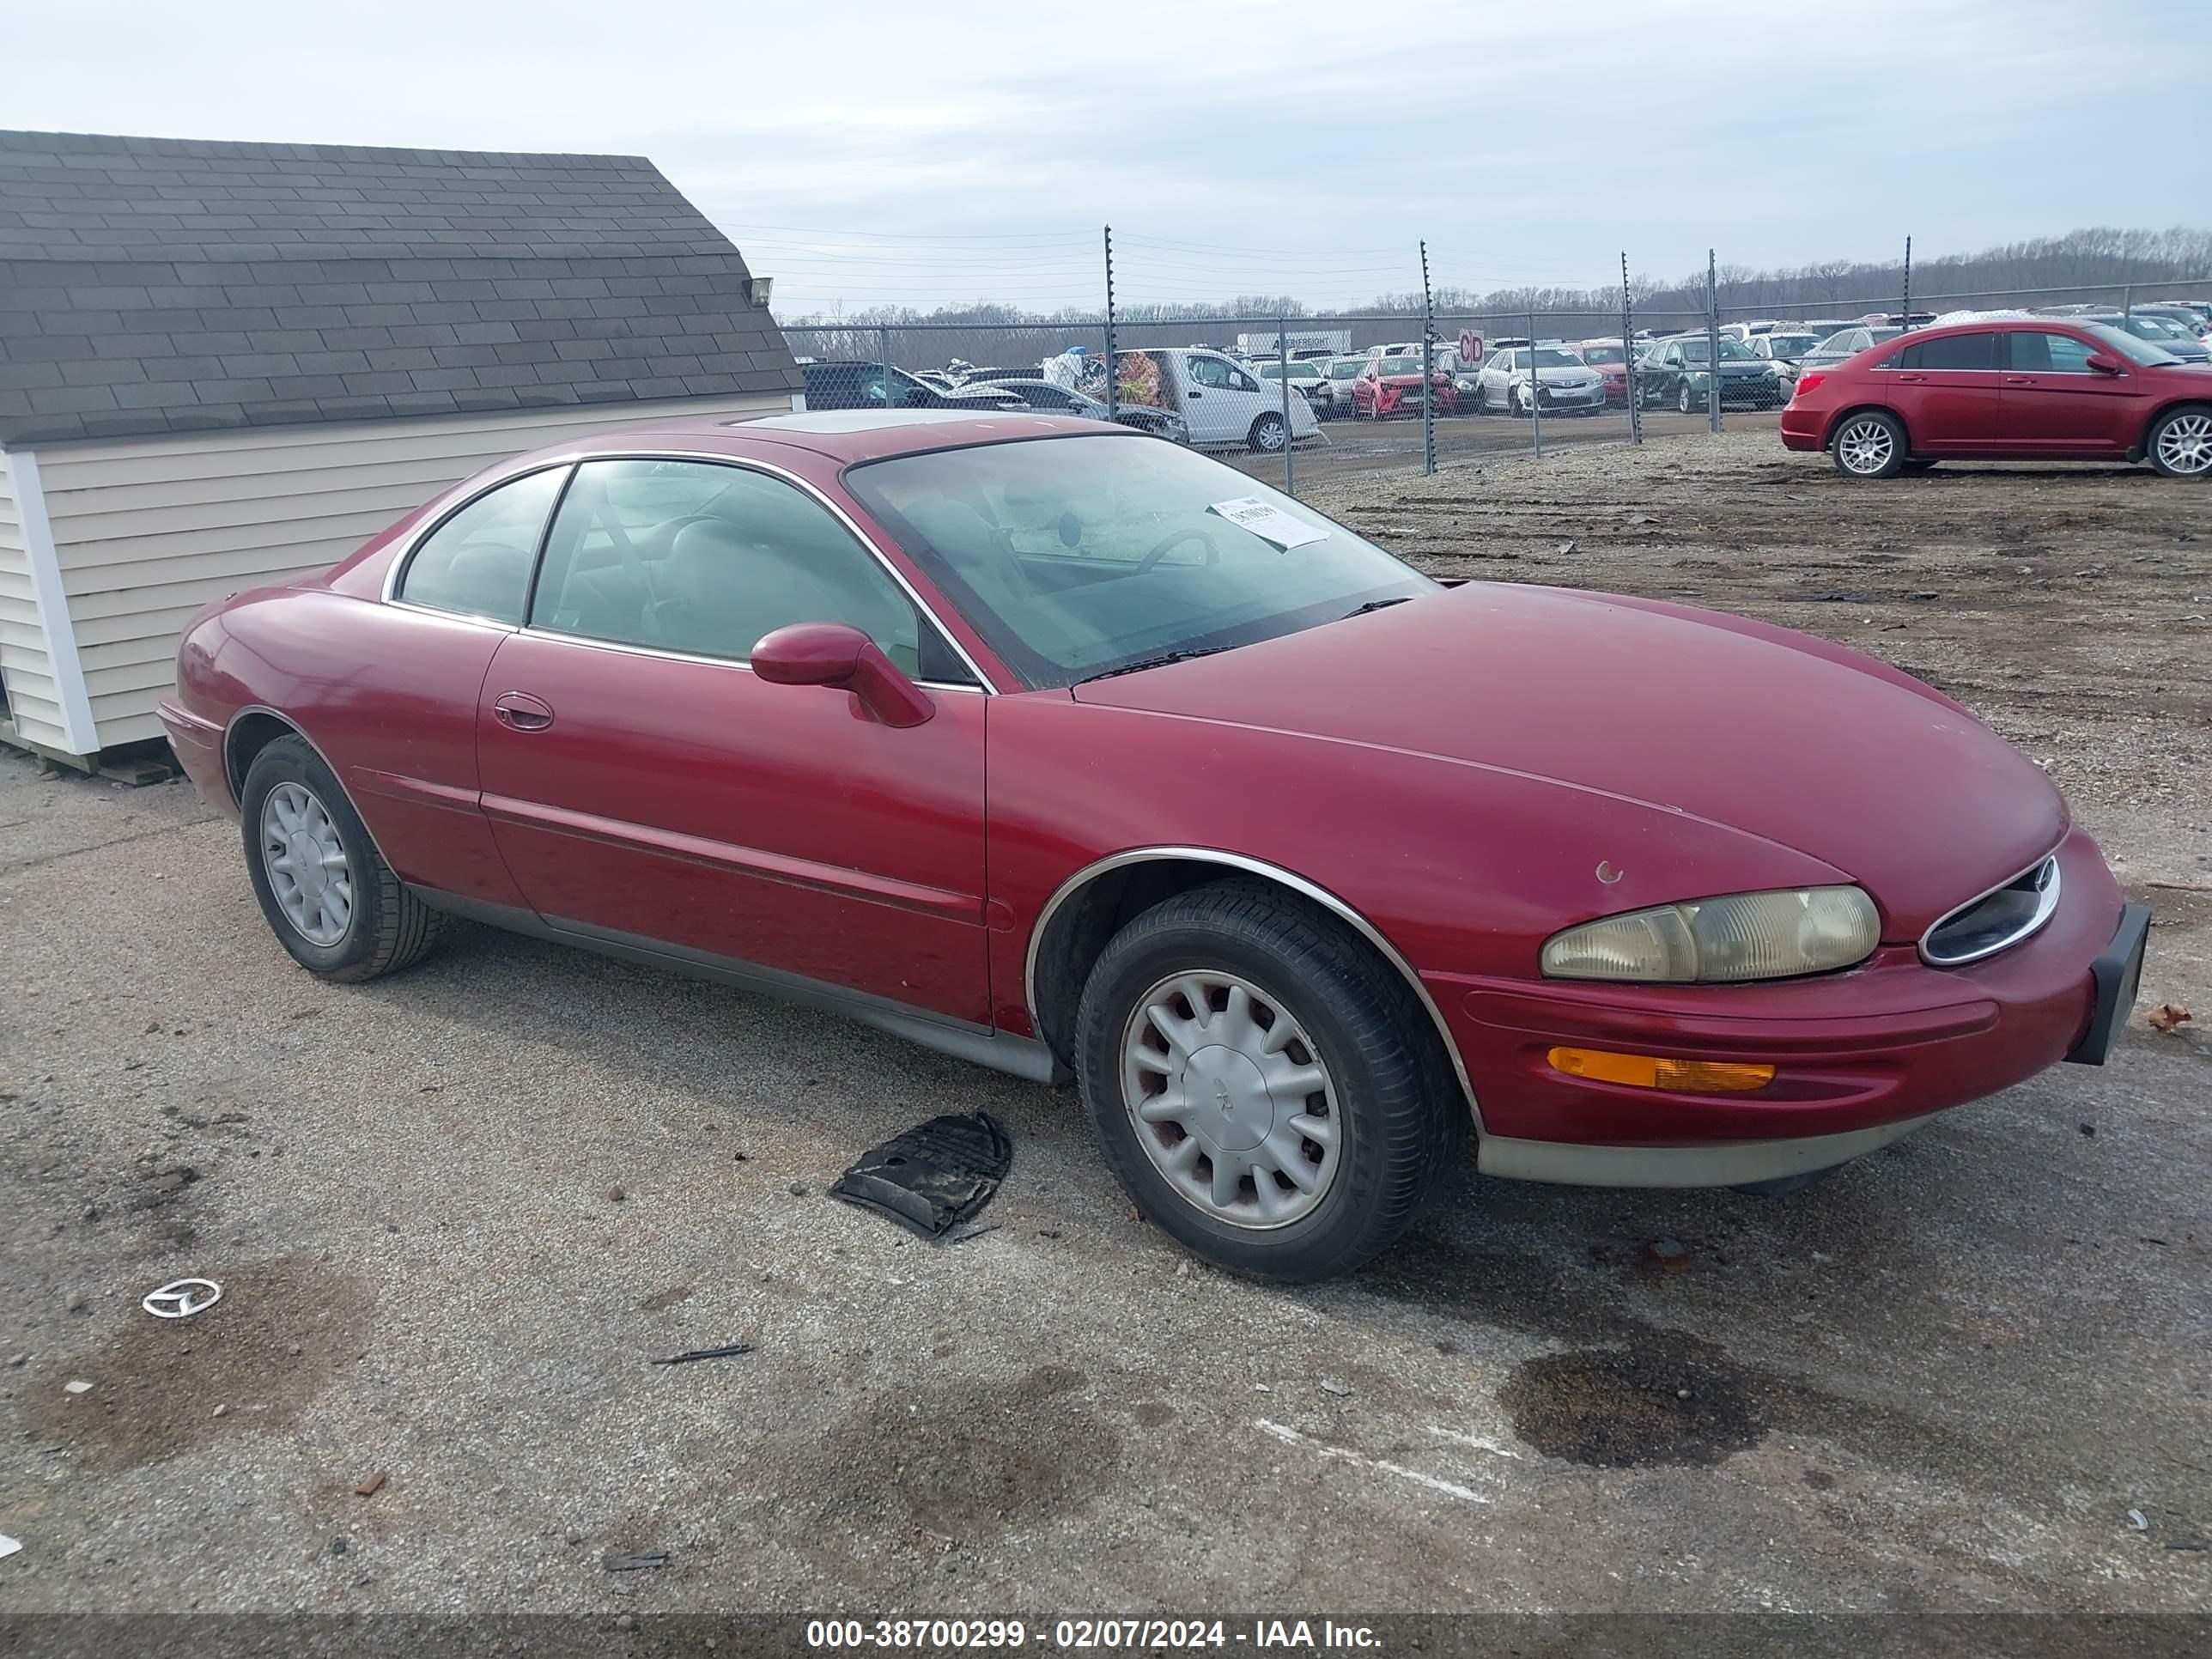 vin: 1G4GD2217S4715224 1G4GD2217S4715224 1995 buick riviera 3800 for Sale in 62656, 301 Madigan Drive, Lincoln, Illinois, USA